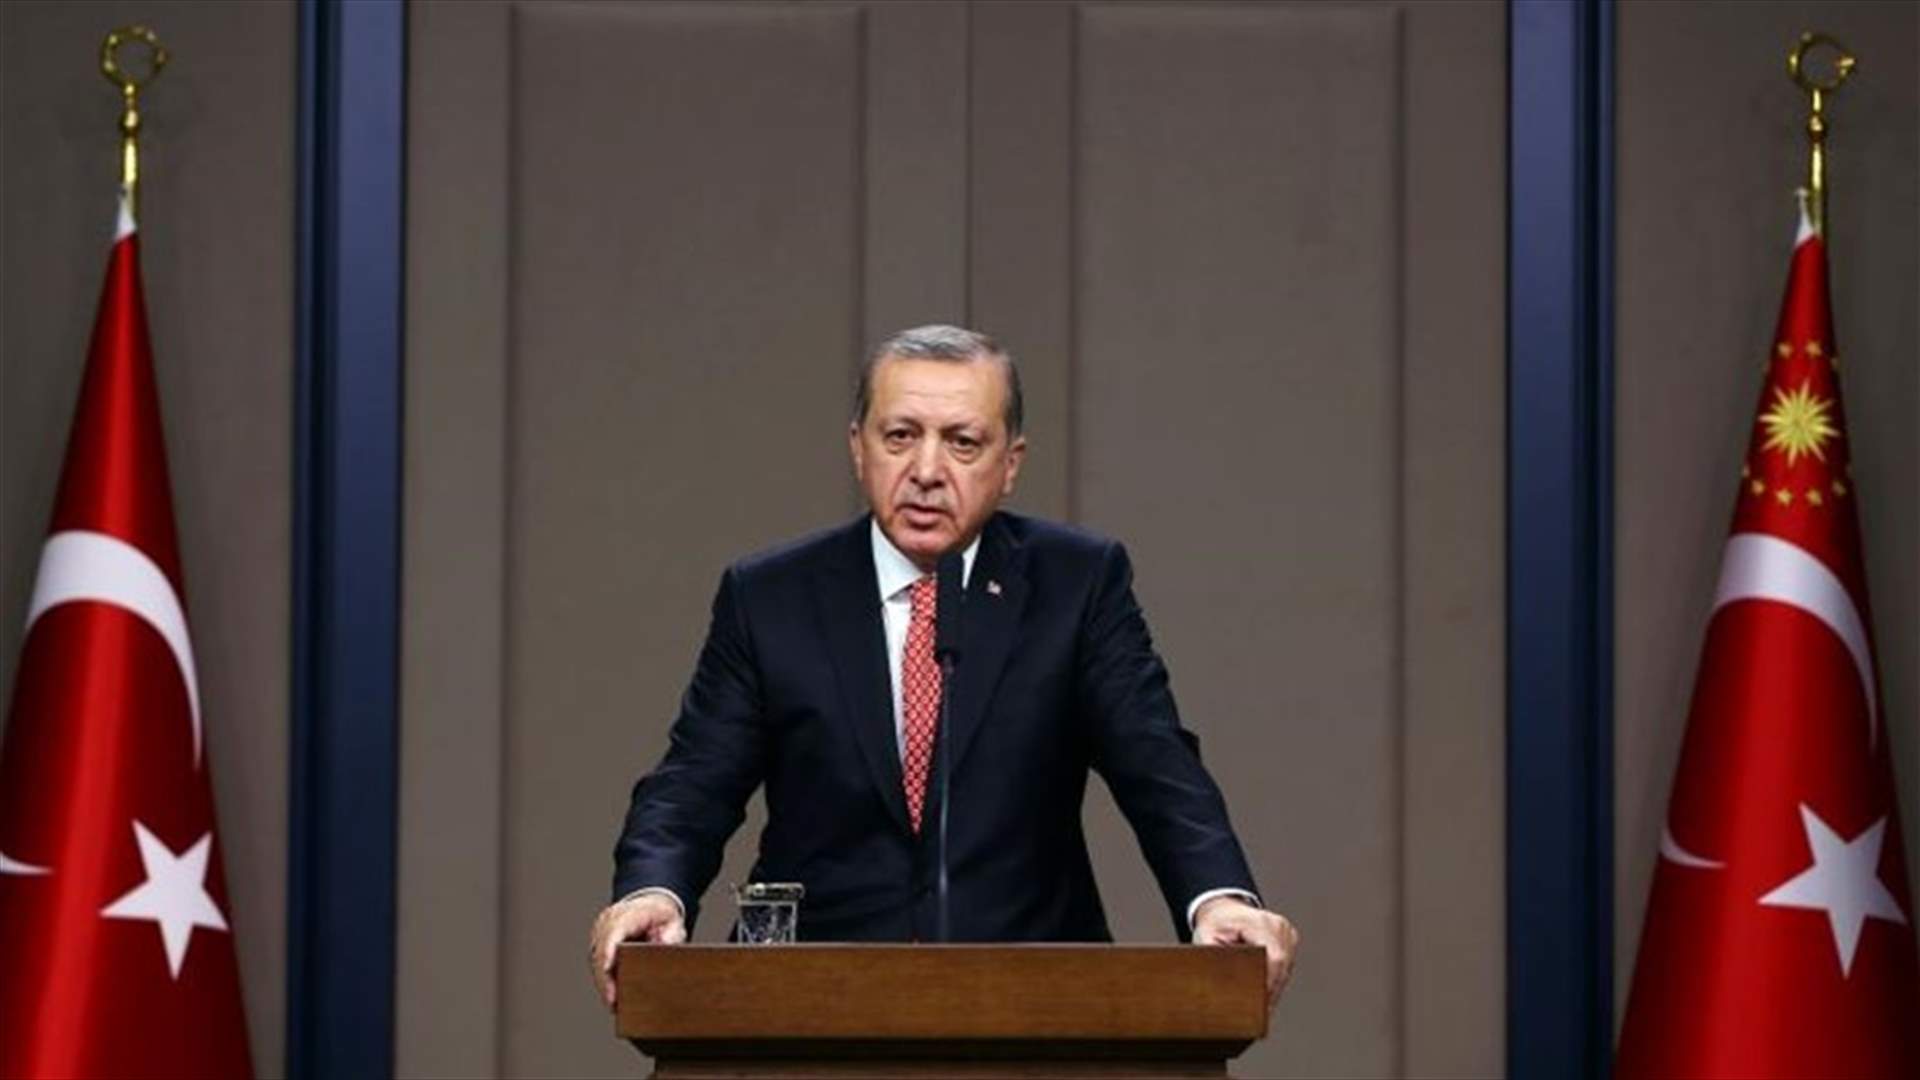 Fed up with EU, Erdogan says Turkey could join Shanghai bloc